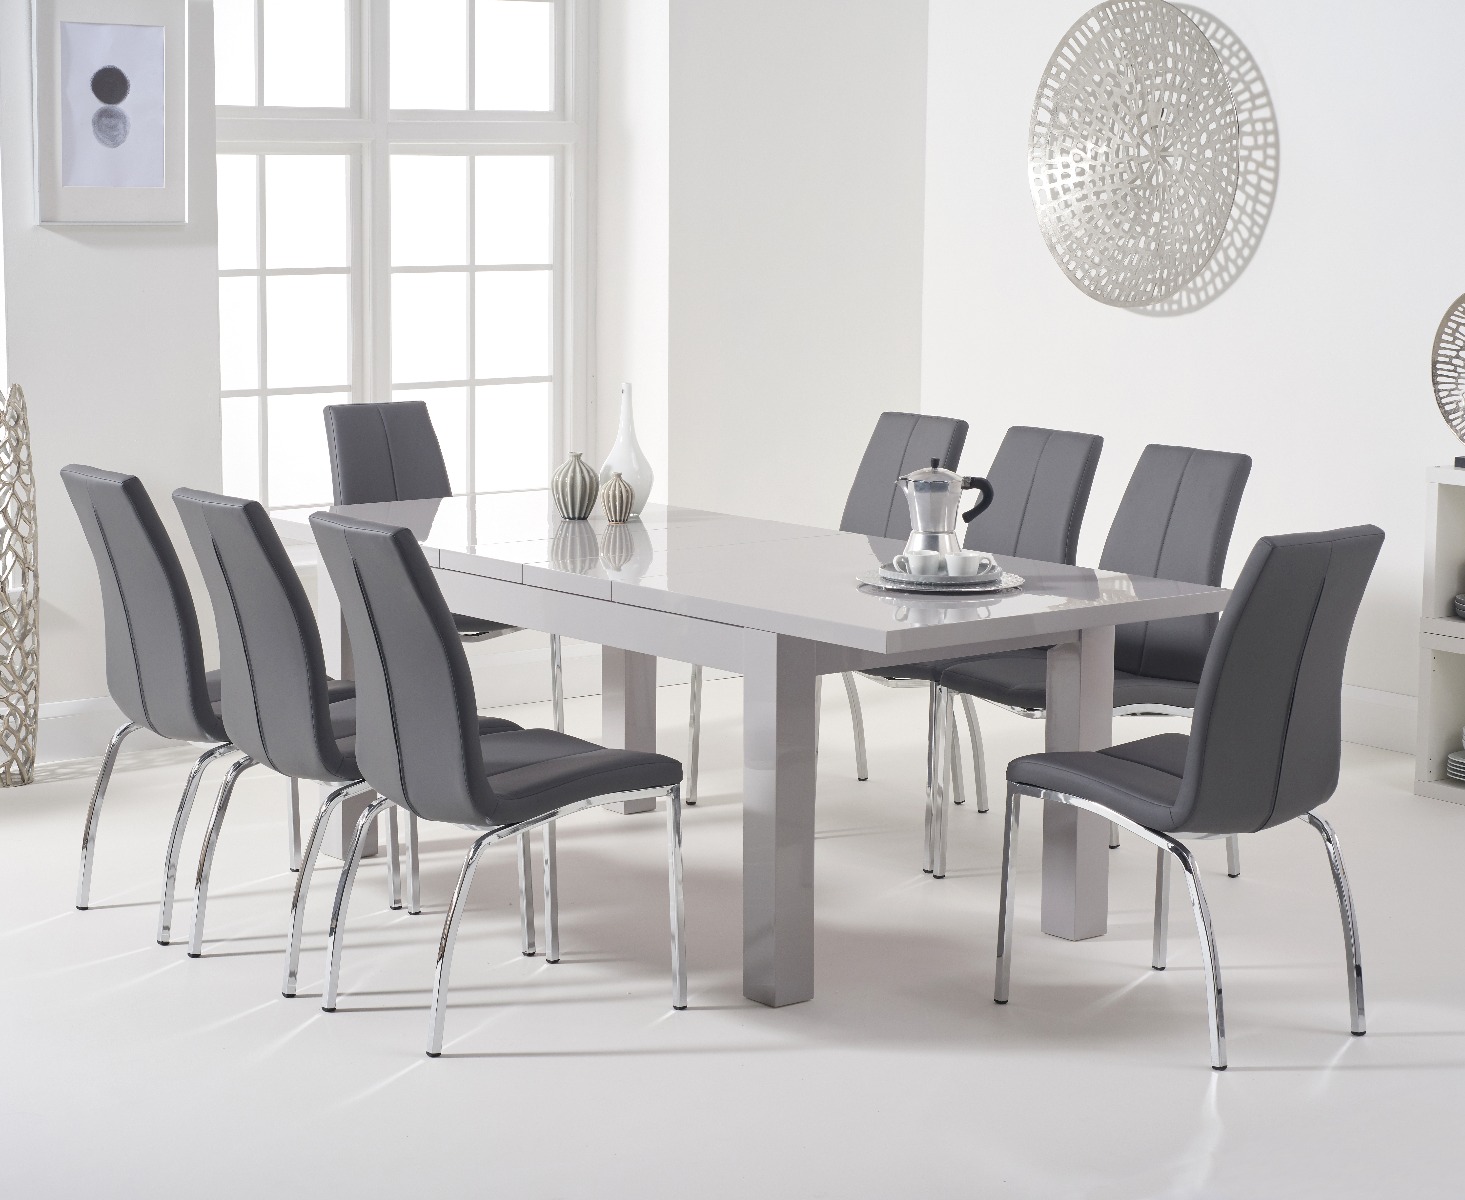 Atlanta Light Grey Gloss 160220cm Extending Dining Table With 4 Grey Cavello Chairs